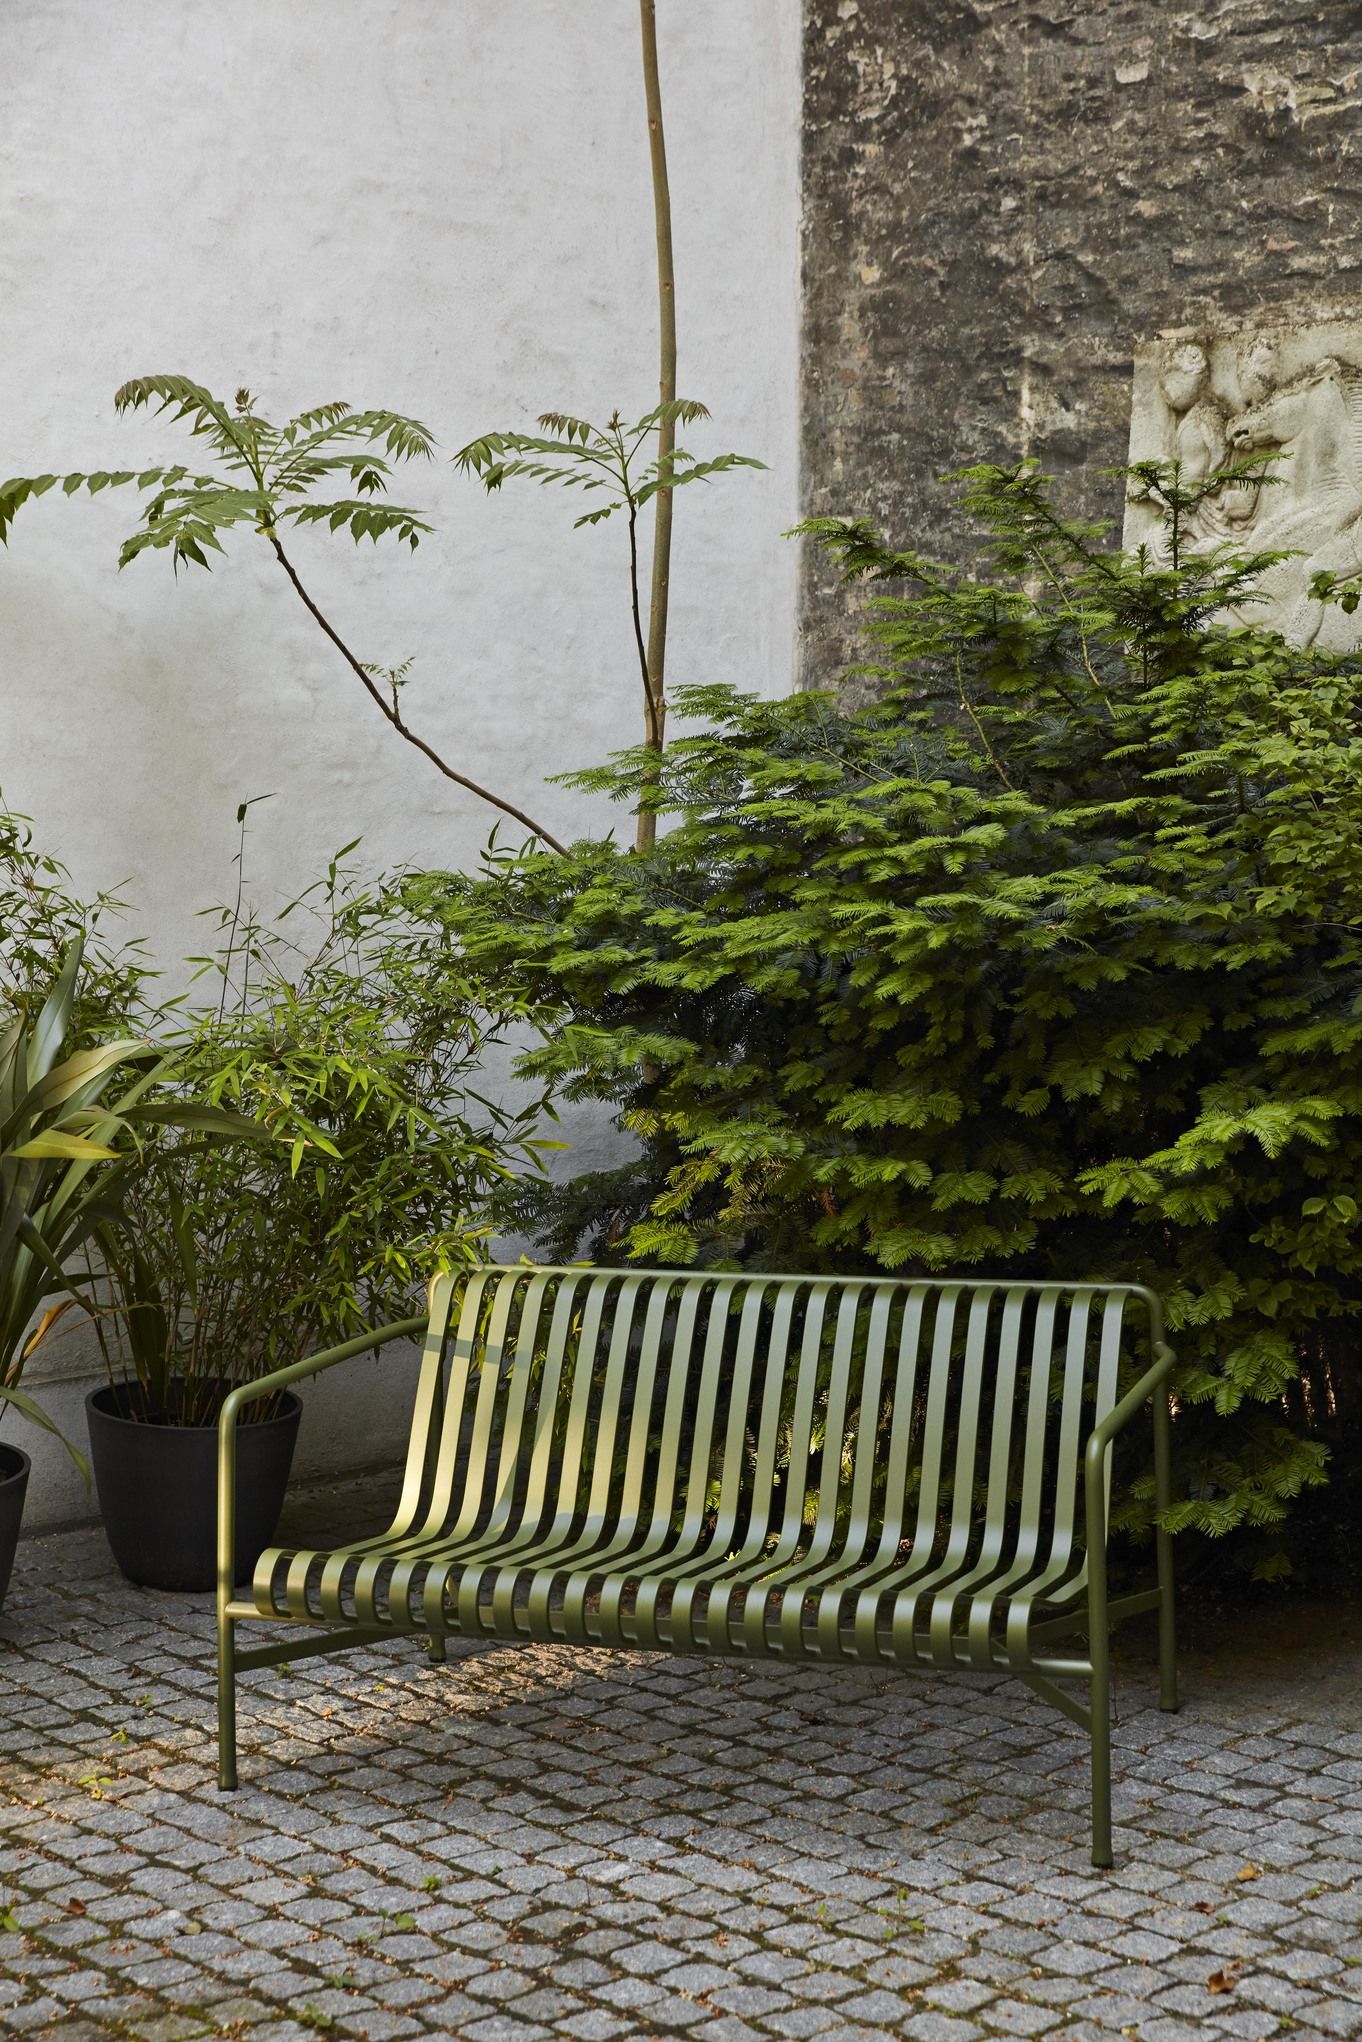 Relax in Style with Garden Chairs: Outdoor Seating That Blends Comfort and Design